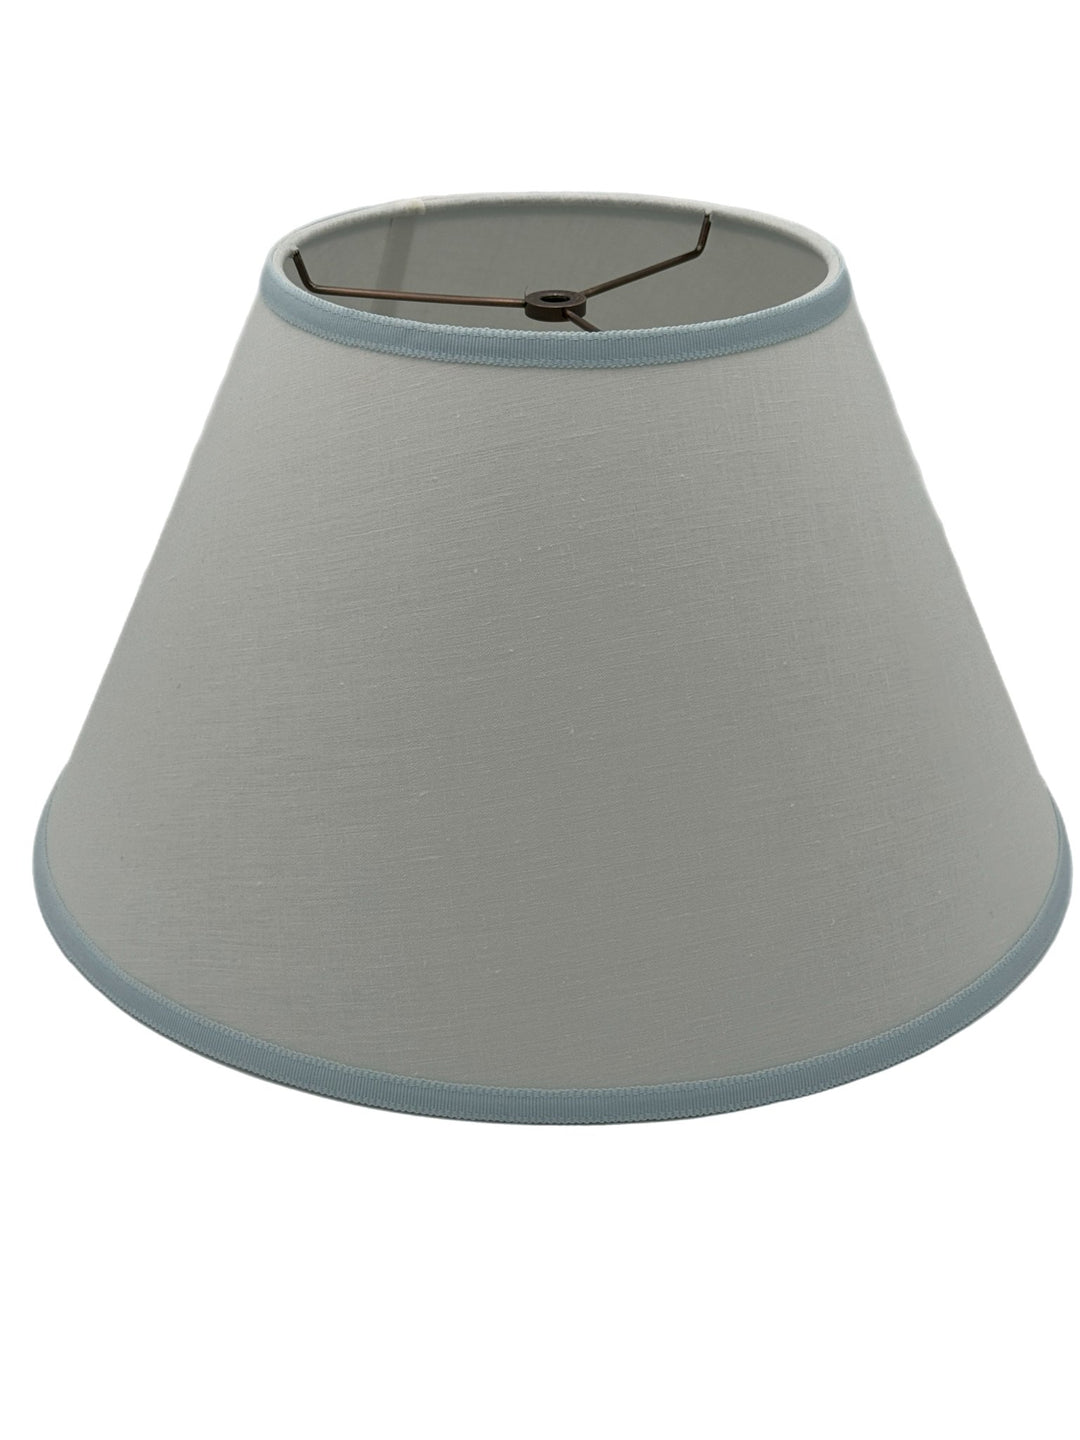 Linen Empire Lamp Shade: 6 Sizes - Lux Lamp Shades